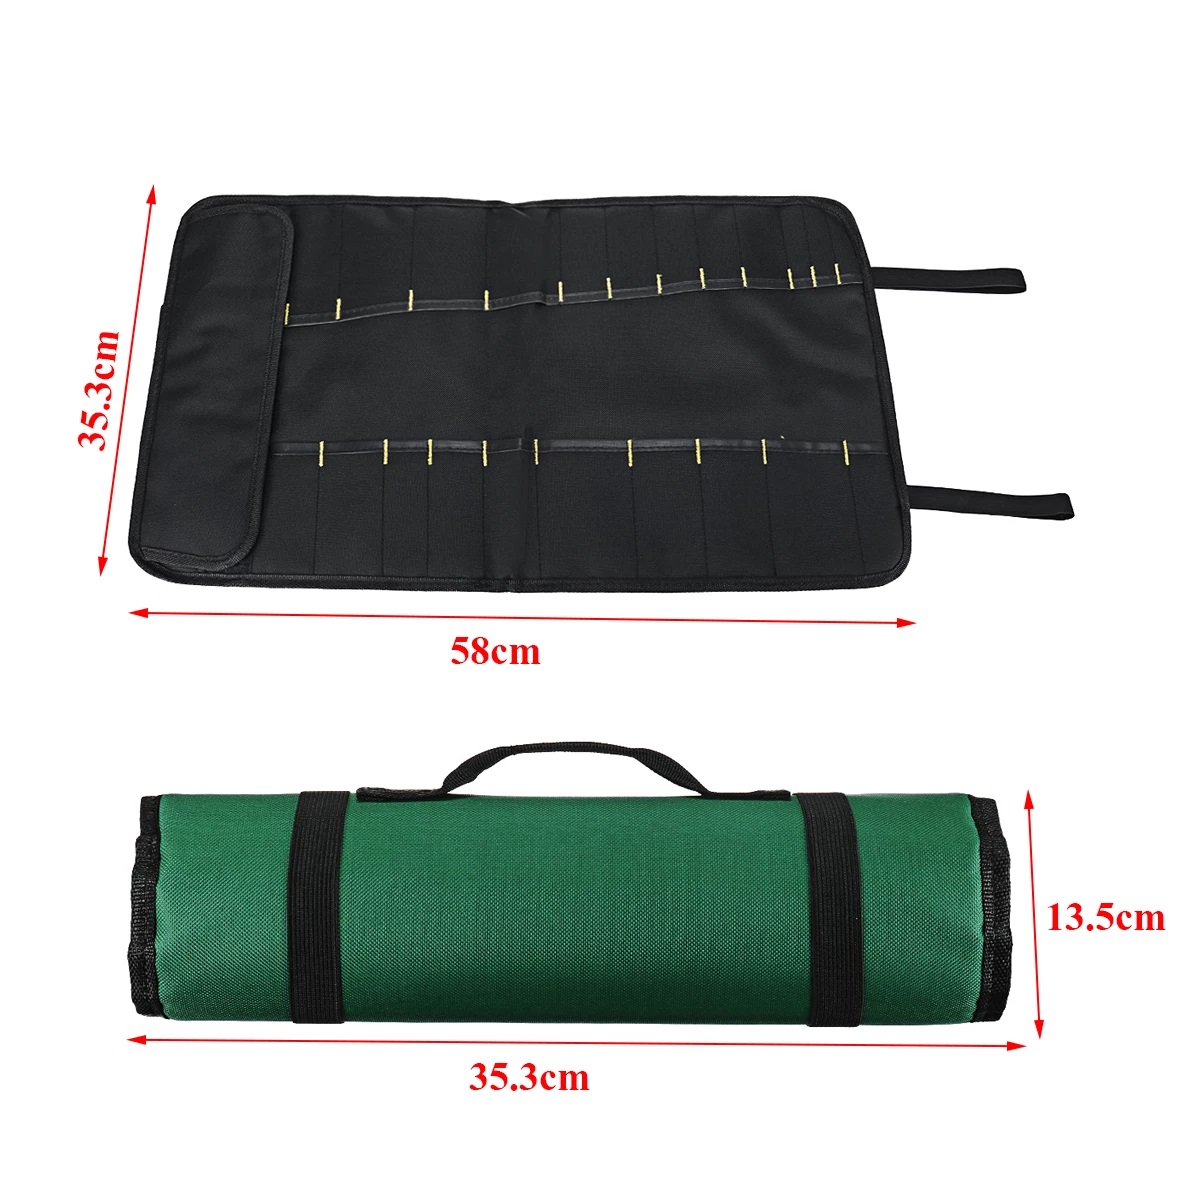 Chef Knife Bag Carry Case Bag Storage Kitchen Tool 22 Pockets Supplies Portable Multifunction Durable Accessories Roll Knife Bag